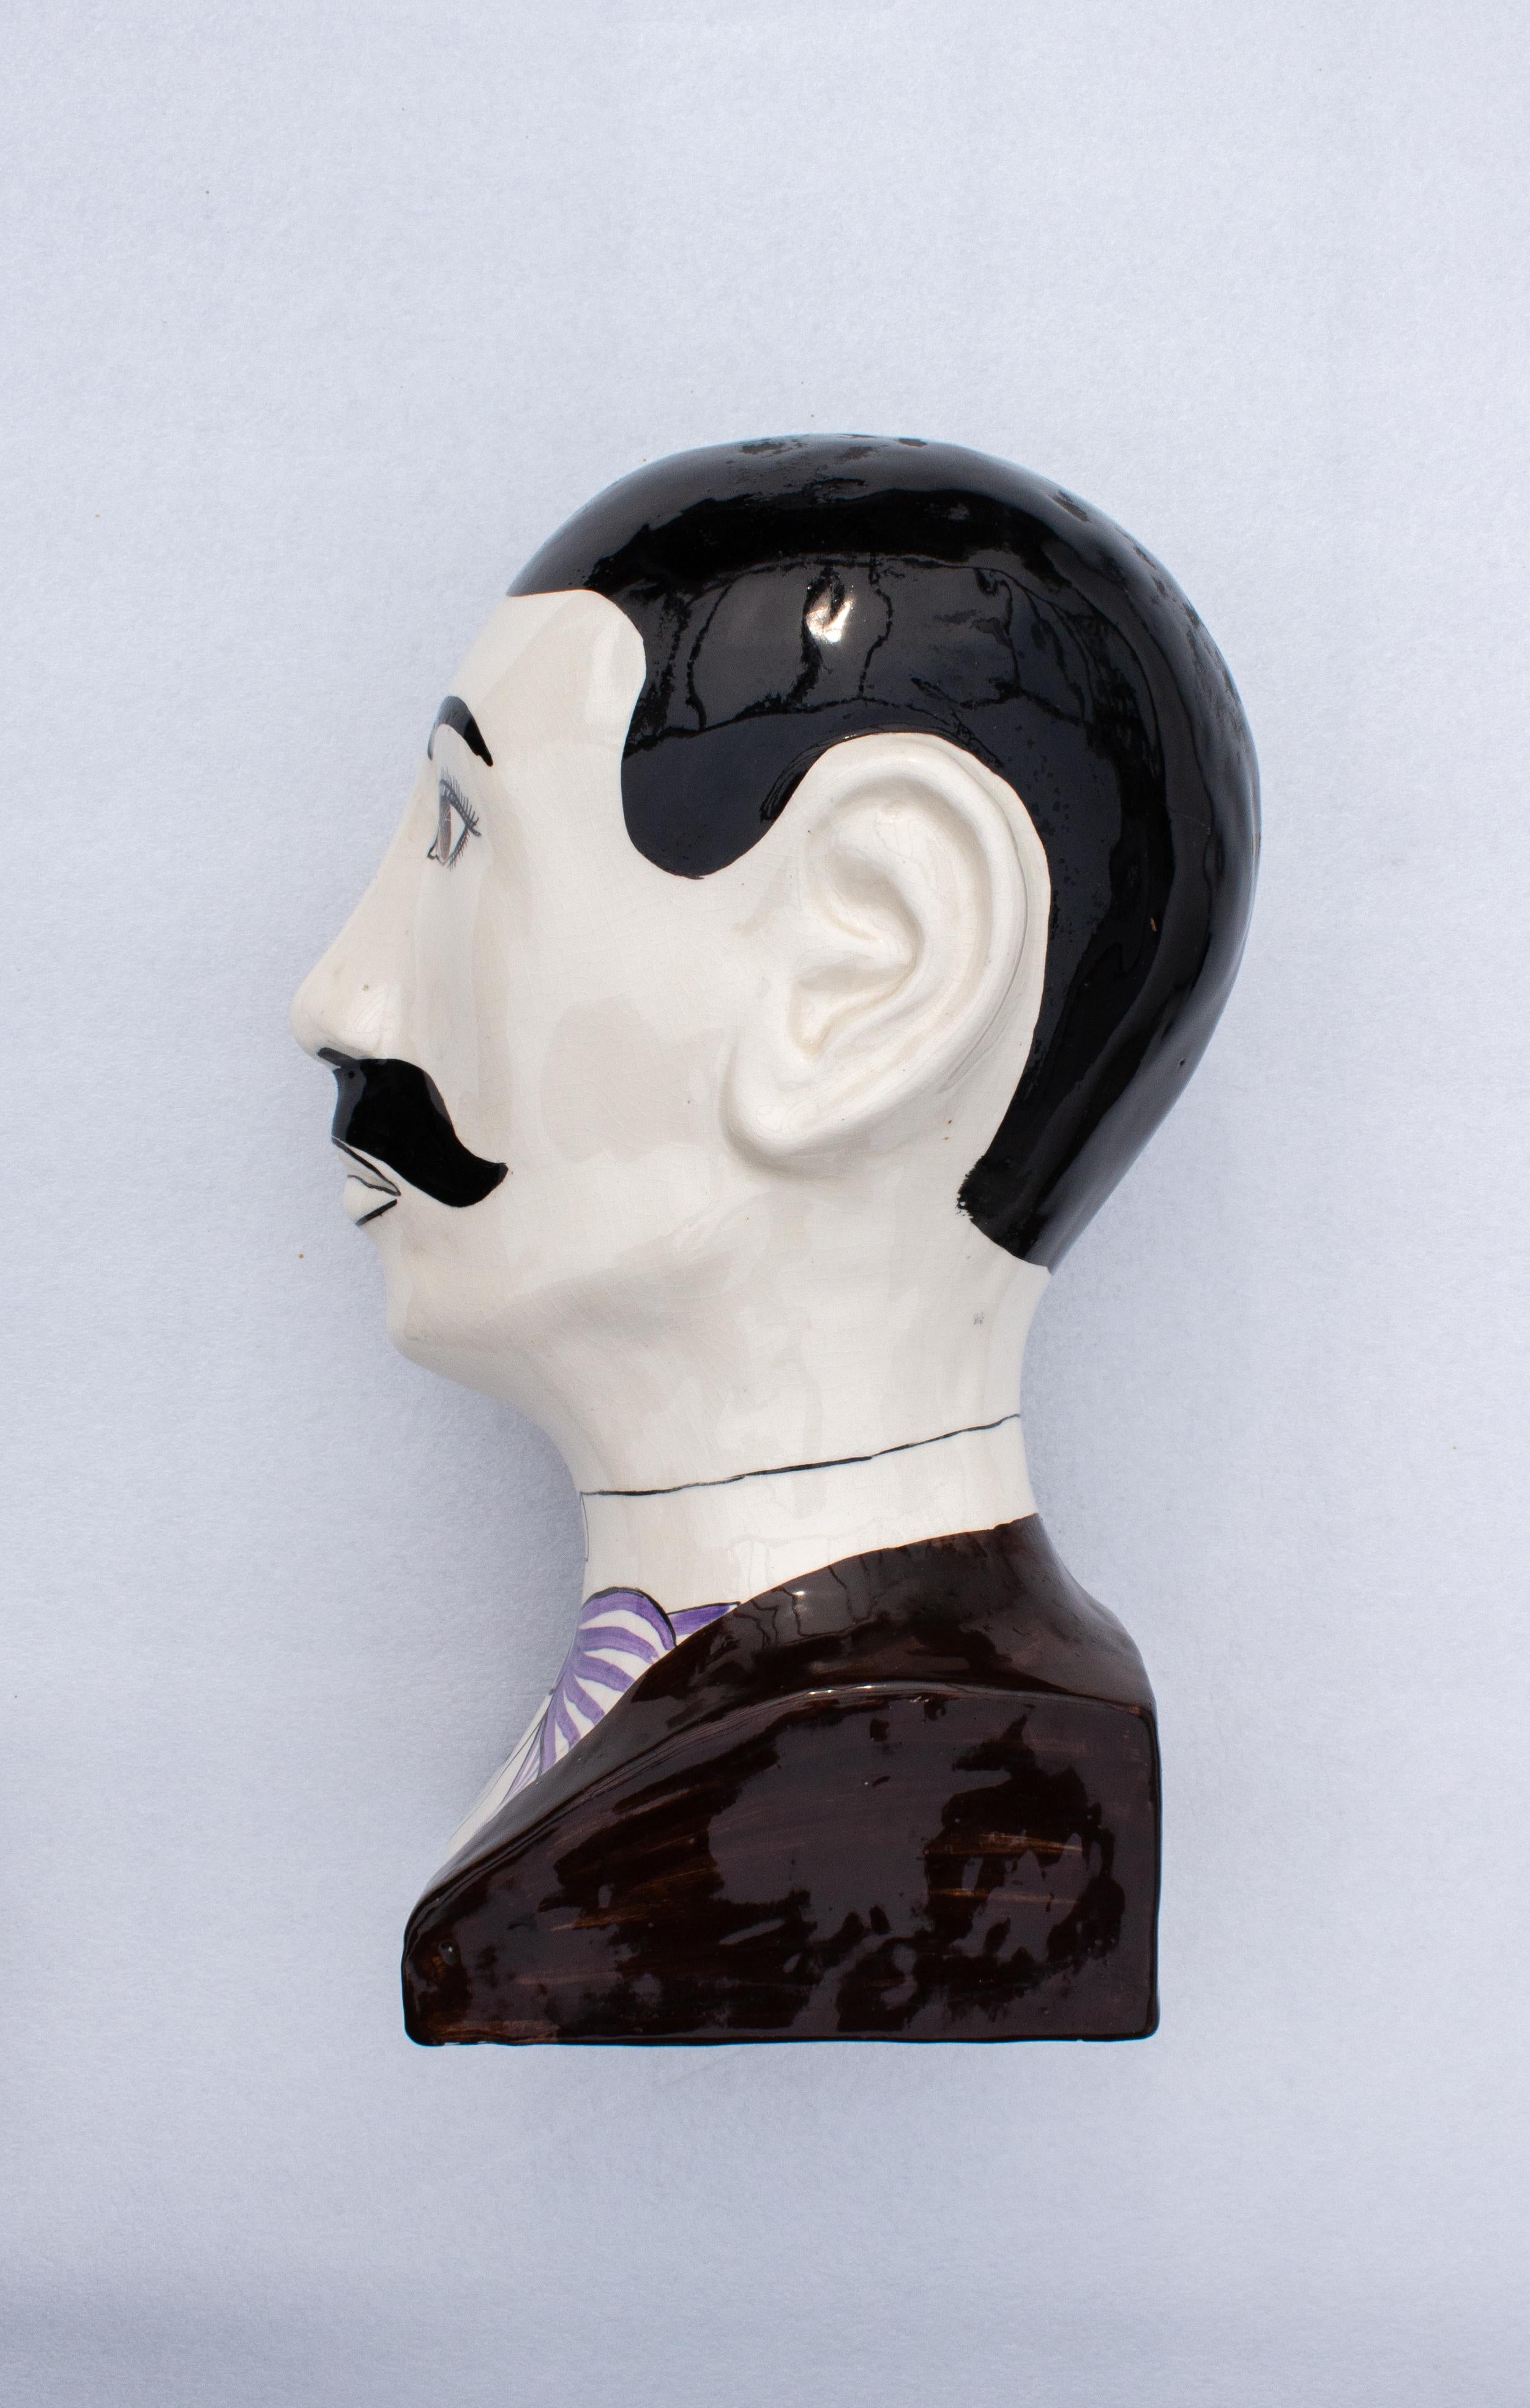 British Pop-Art Sculpture by Toni Davidson and Alan.P. Smith for Dodo Designs.
Ceramic bust modelled in the form of a French or British gentleman with moustache wearing a suit with lilac tie, signed to the base. A fun pop icon placed on a desk from